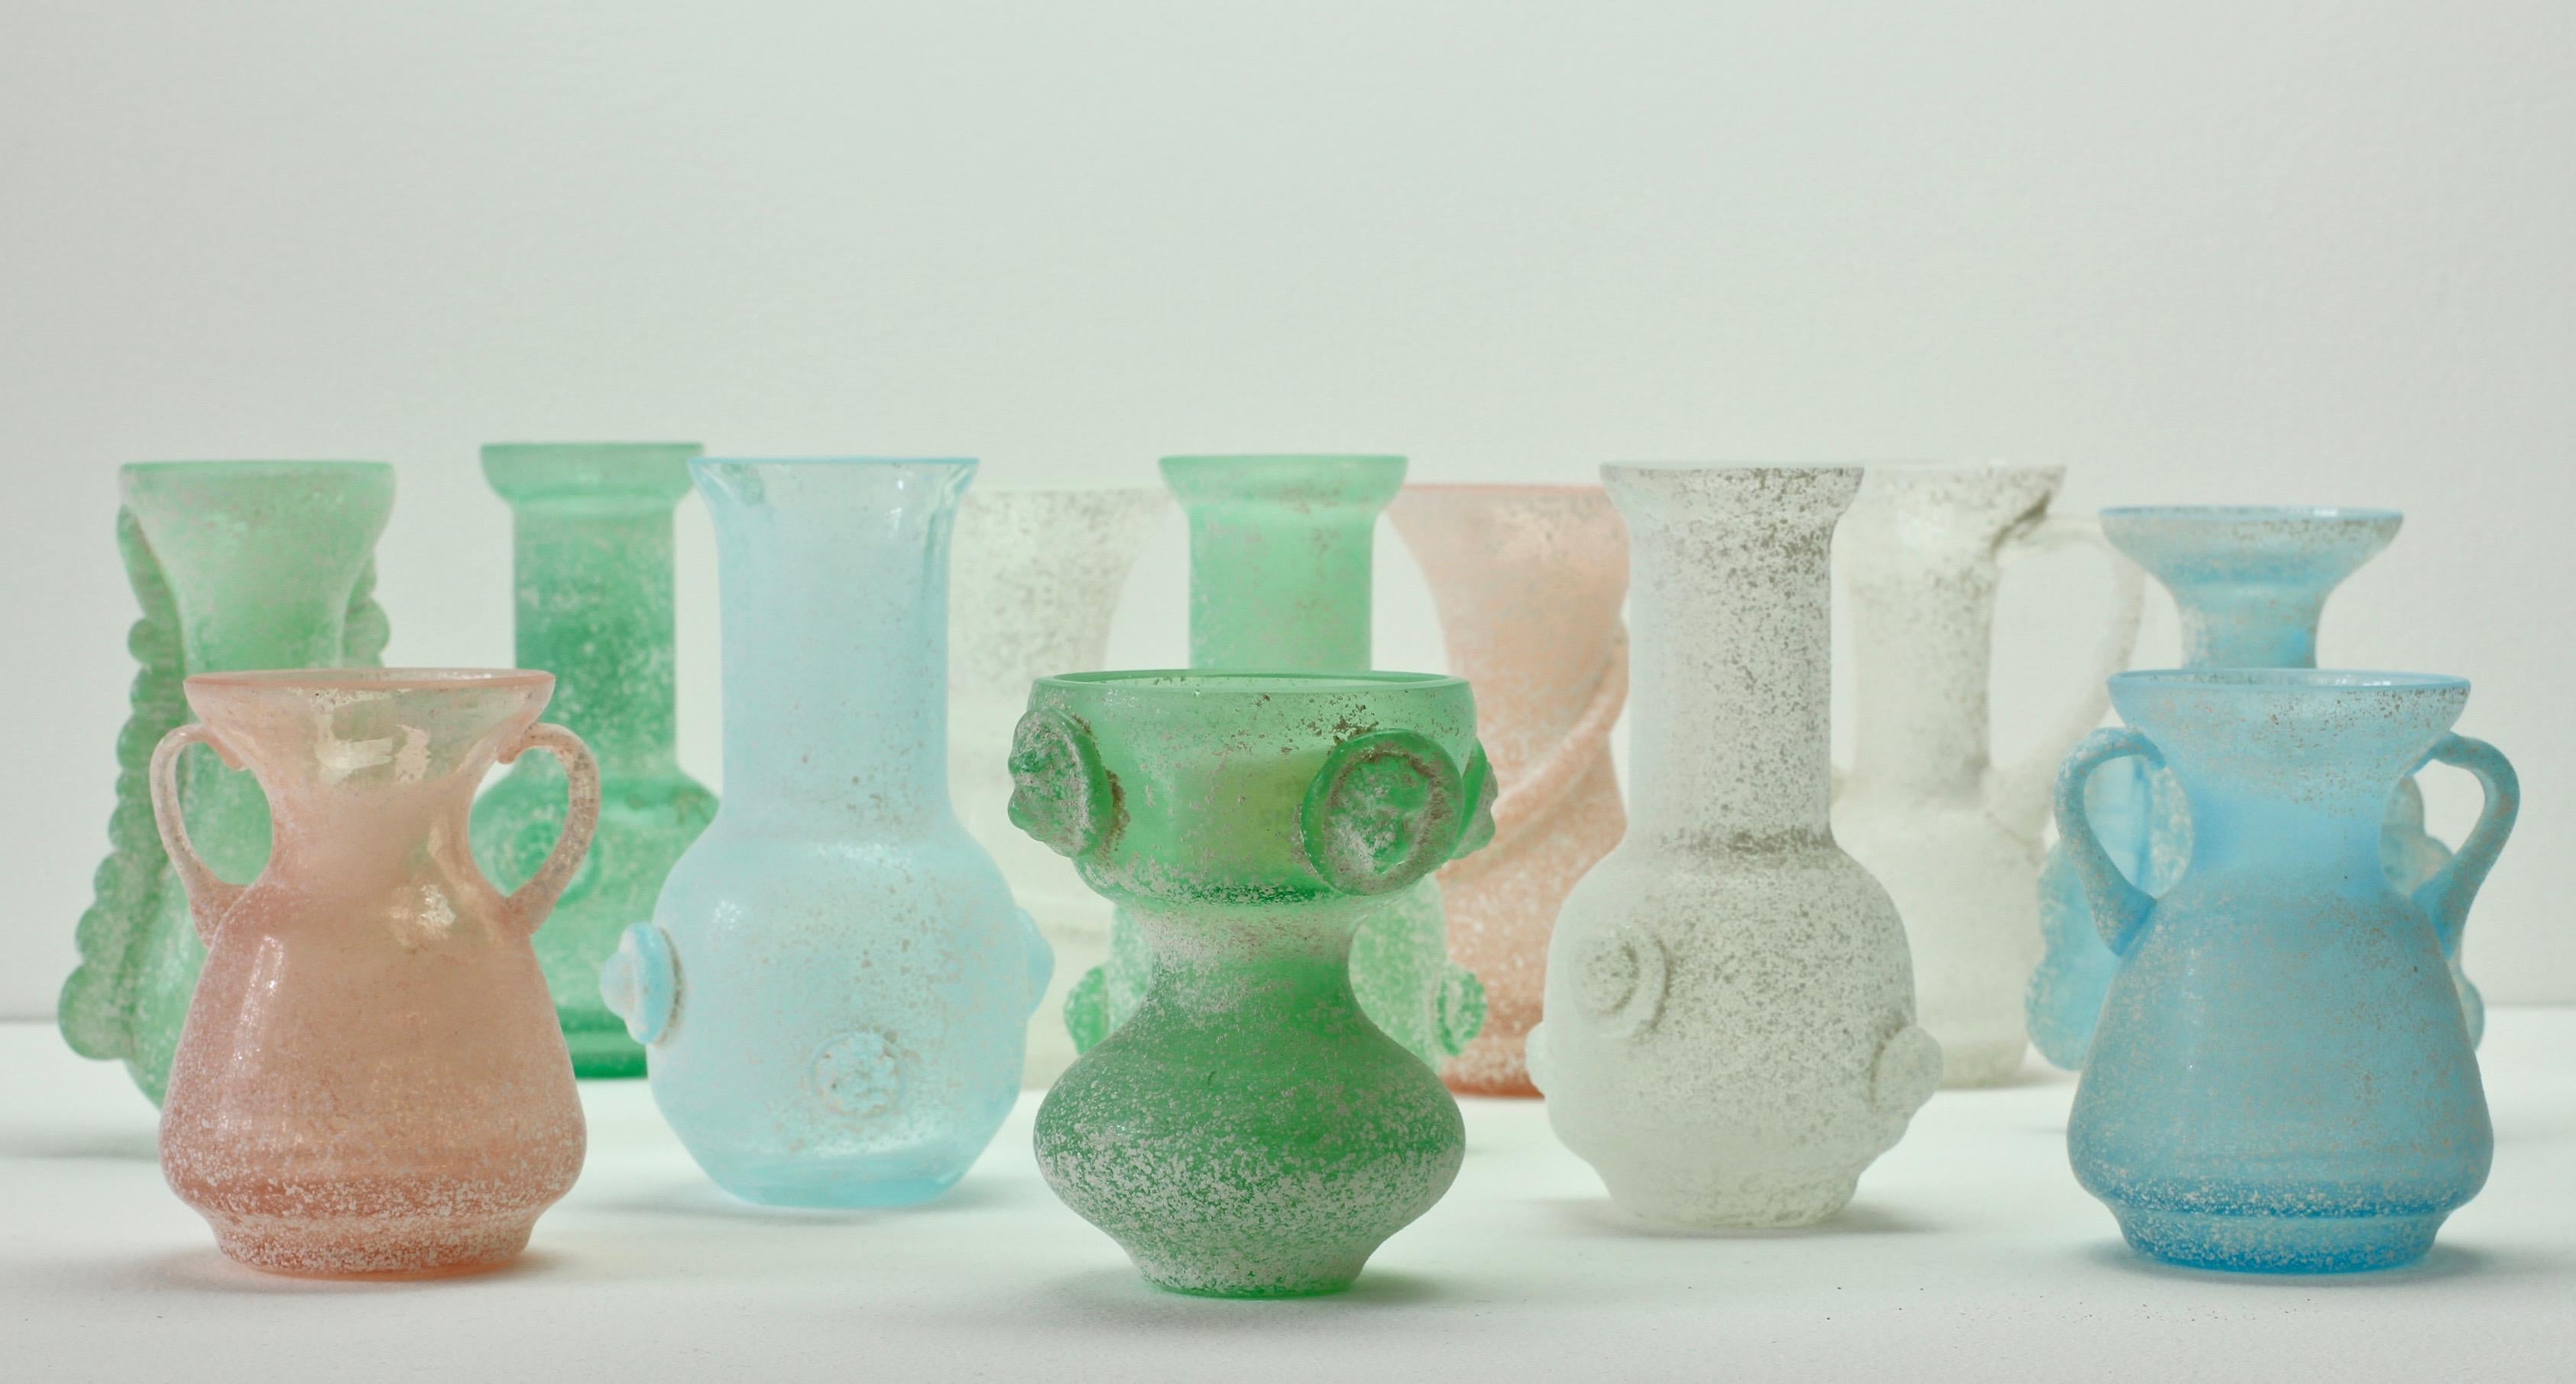 Wonderful collection / ensemble of 'a Scavo' colored / coloured glass vases and vessels by Vittorio Rigatierri, who took over from Marco Pinzoni as Artistic Director in 1971 until 1992 at Seguso Vetri d'Arte Murano, Italy. Elegant in form and